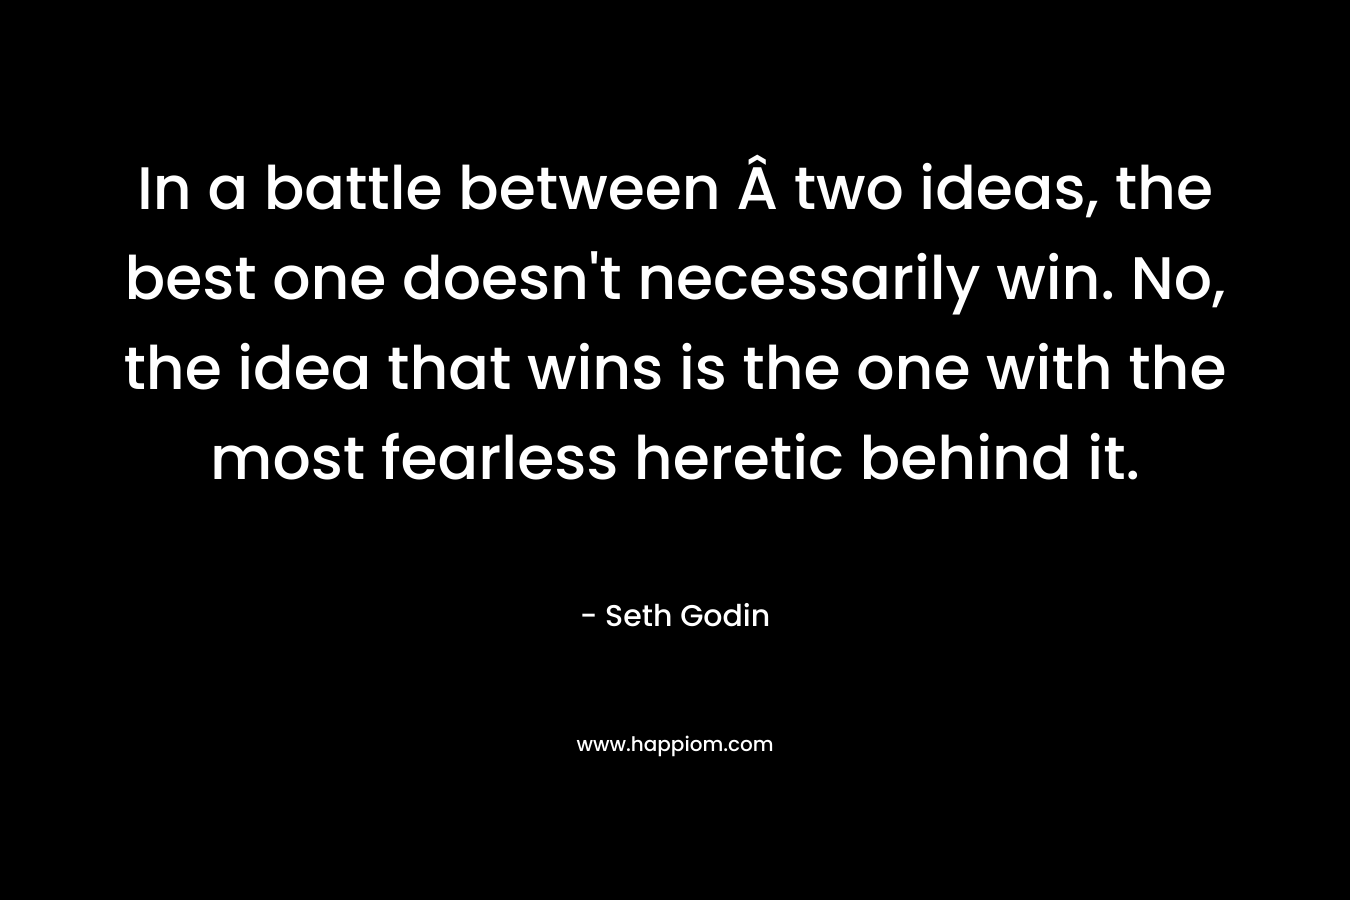 In a battle between Â two ideas, the best one doesn’t necessarily win. No, the idea that wins is the one with the most fearless heretic behind it. – Seth Godin